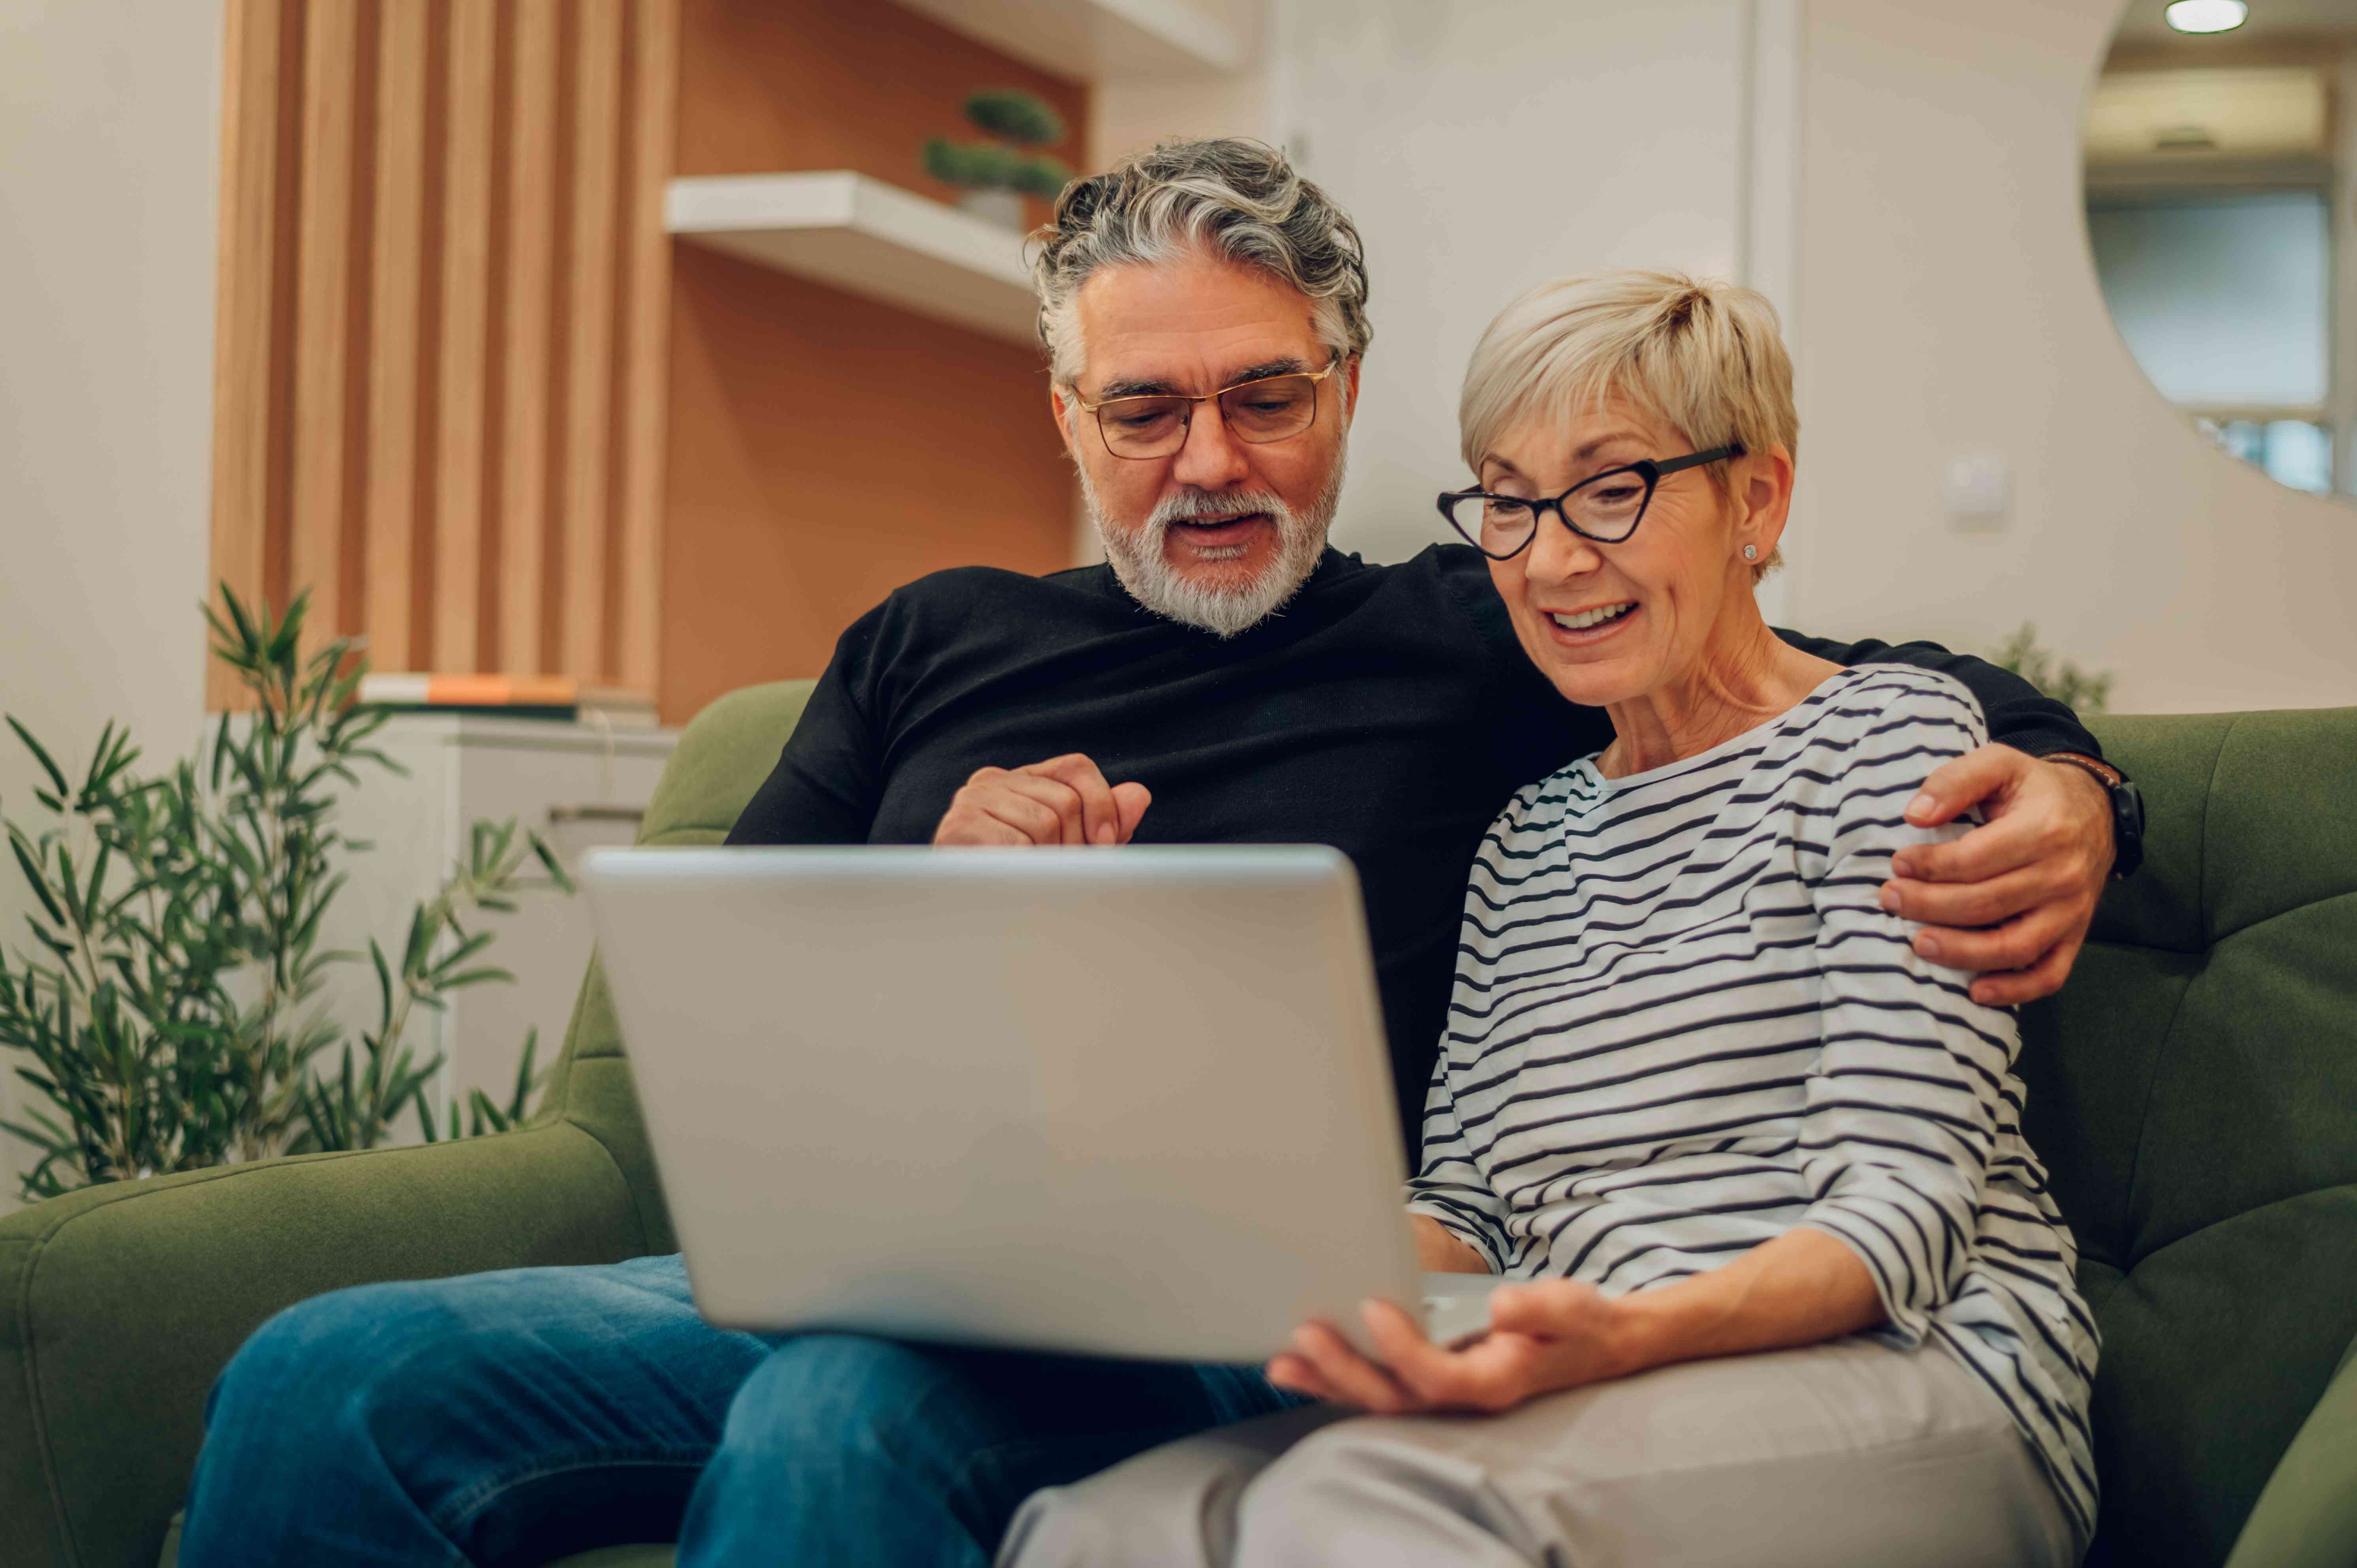 Older couple sitting on their couch and looking happily at something on their laptop screen